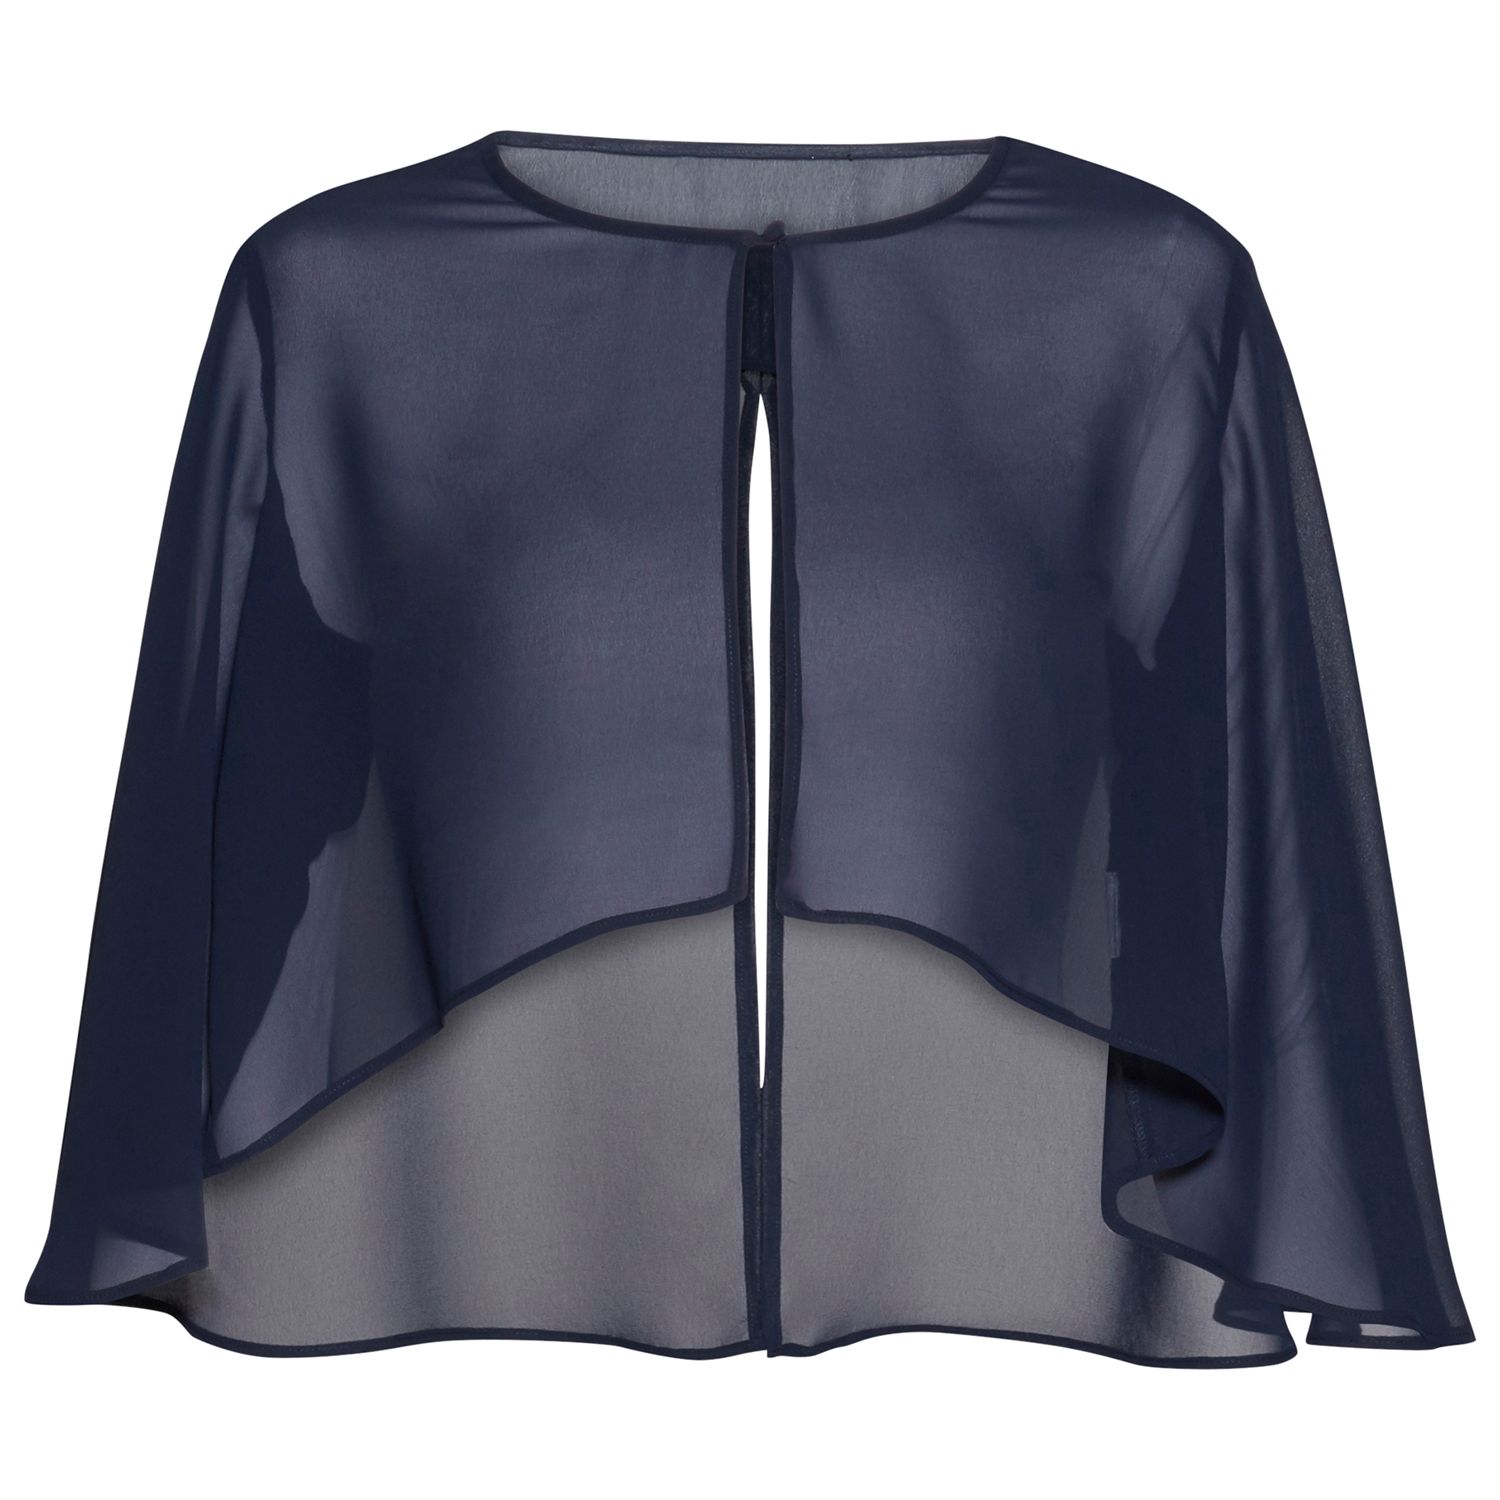 Gina Bacconi Chiffon Cape With Open Back Detail, Spring Navy, 8